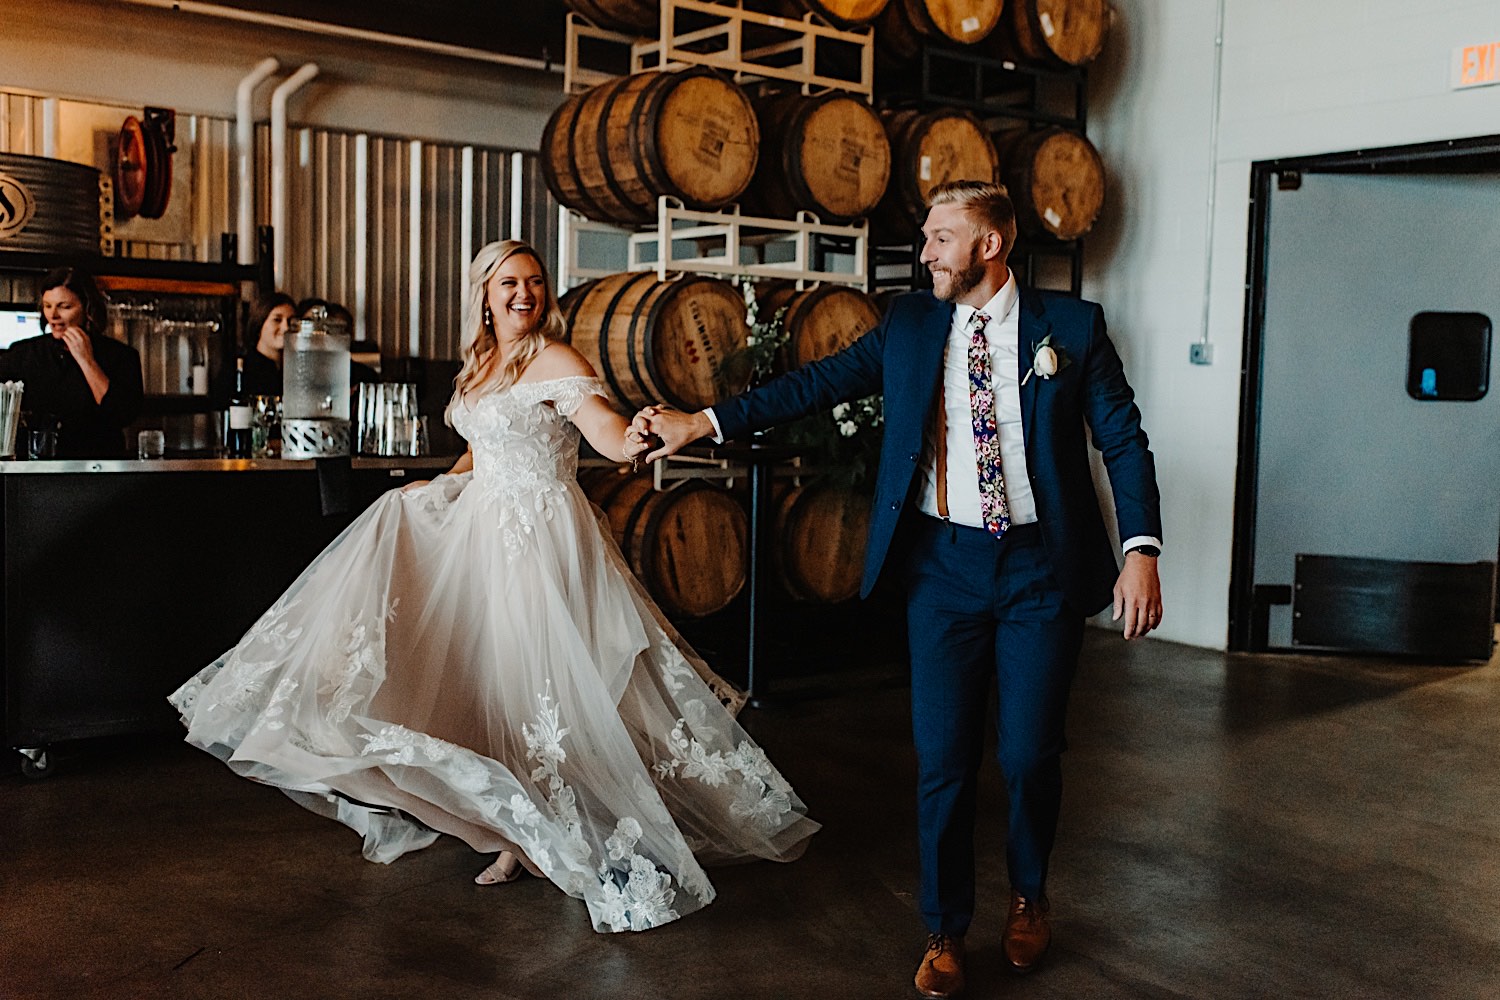 A bride and groom hold hands and smile as they enter their wedding reception at their venue, Destihl Brewery in Normal, Illinois